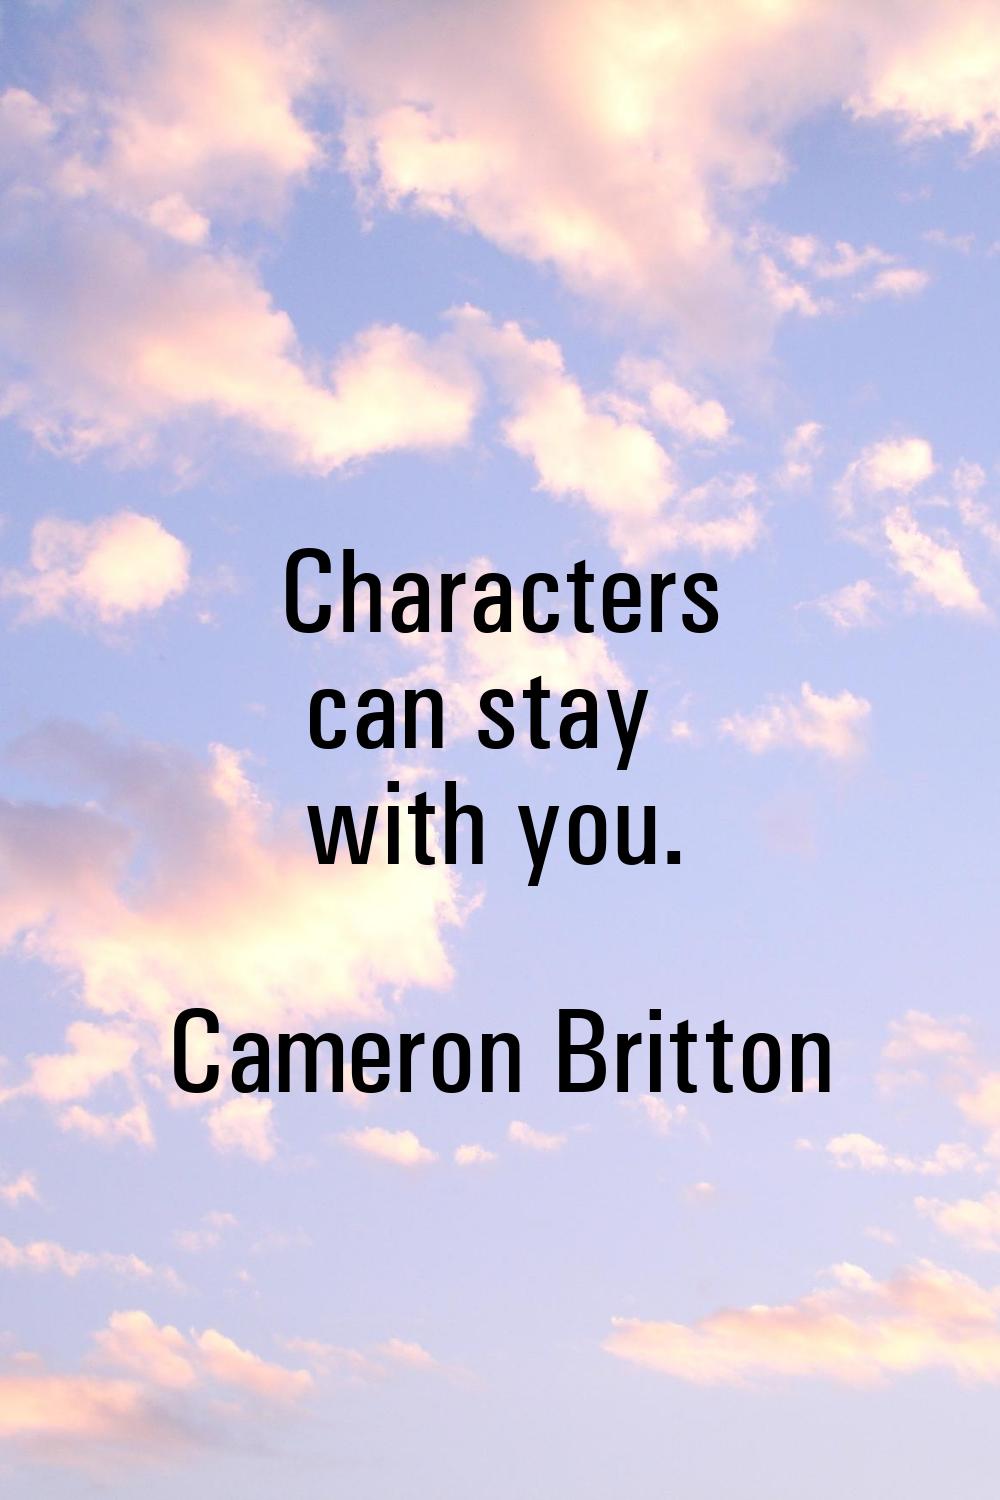 Characters can stay with you.